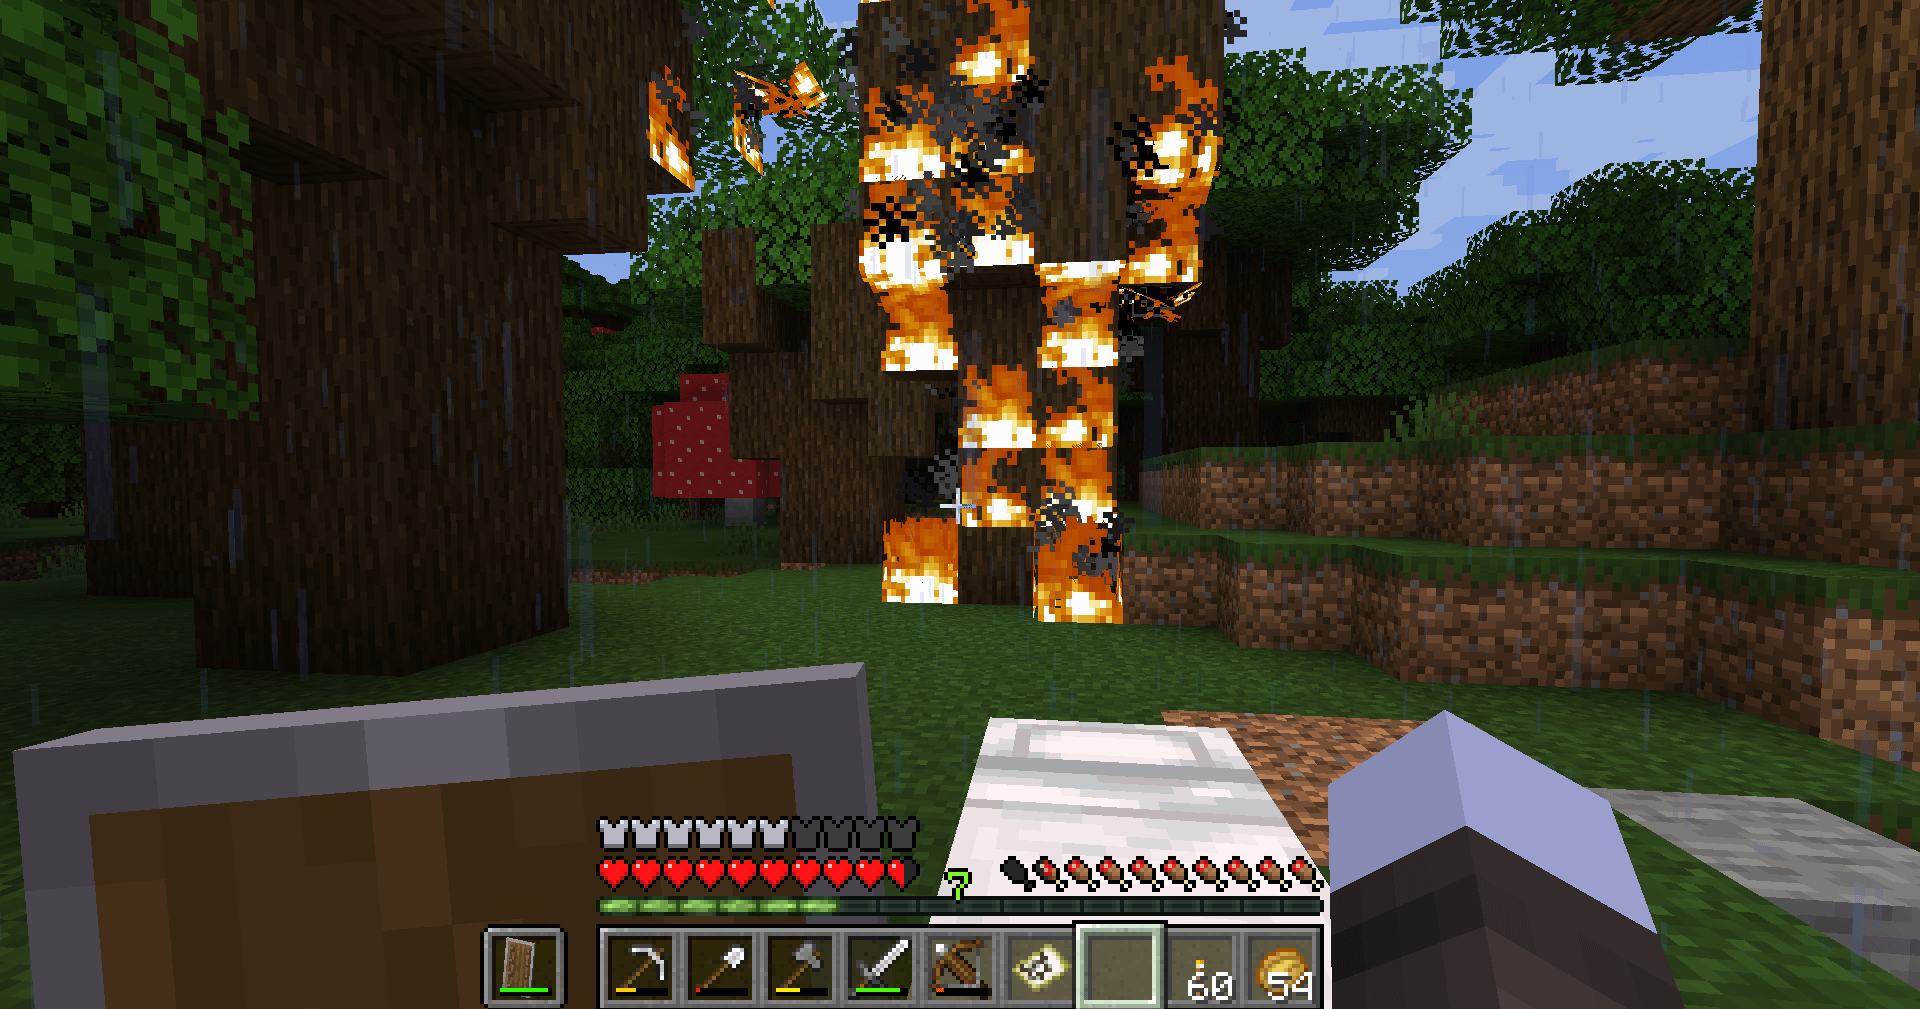 Minecraft Memes - "This is fine. Just another day in Minecraft."